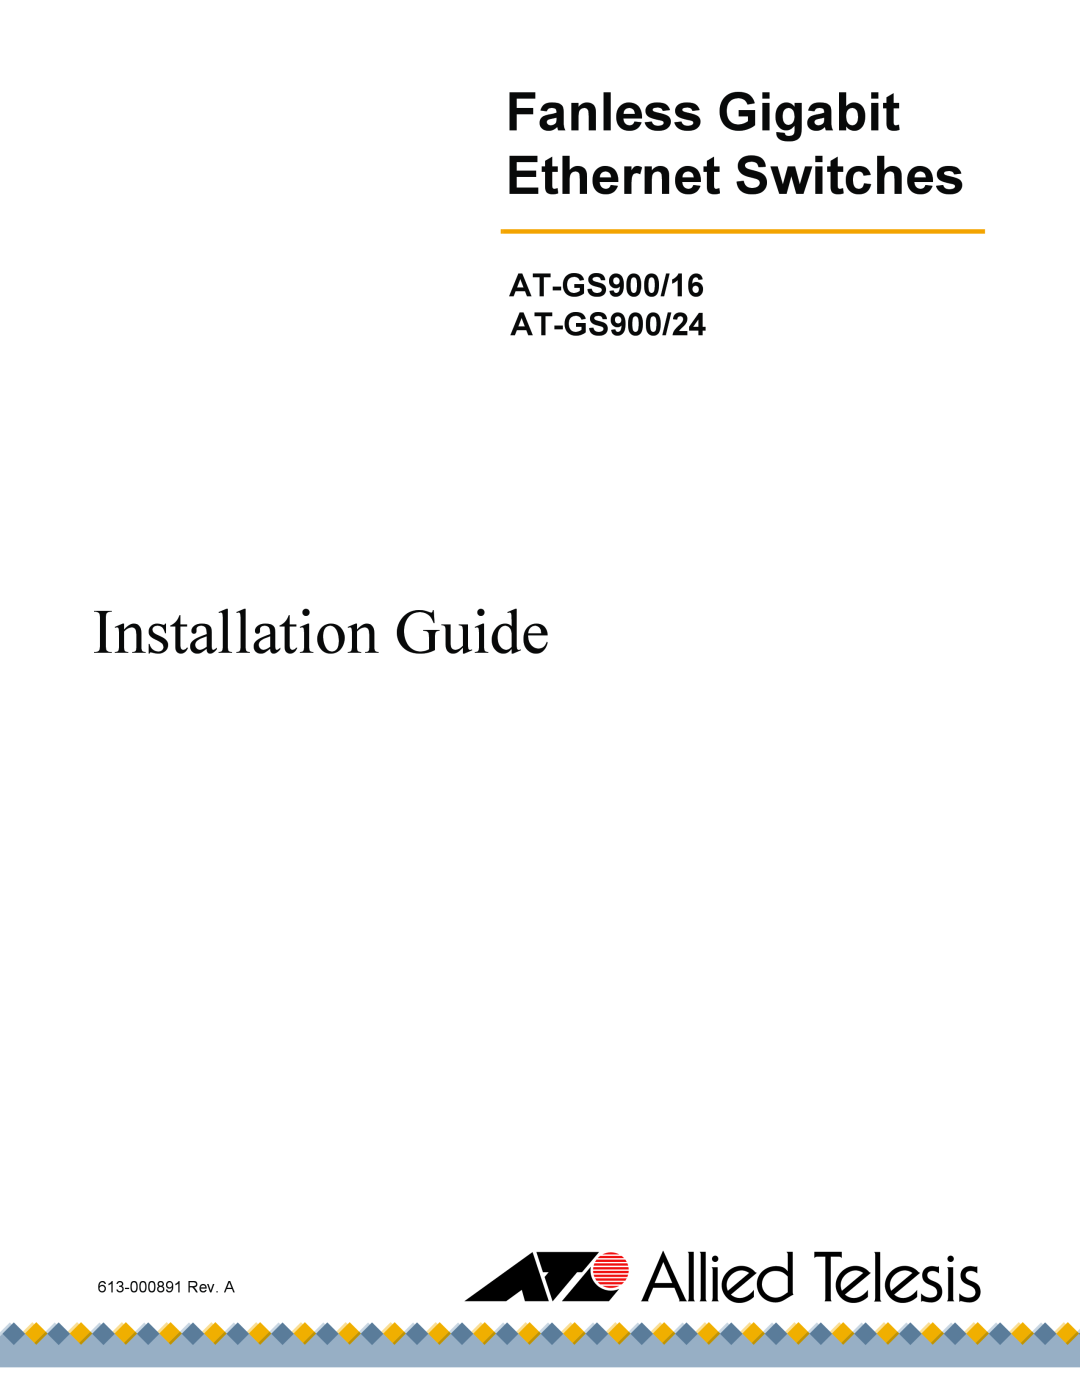 Allied Telesis GS900/5E manual Installation Guide, Fanless Gigabit Ethernet Switches, AT-GS900/16 AT-GS900/24 